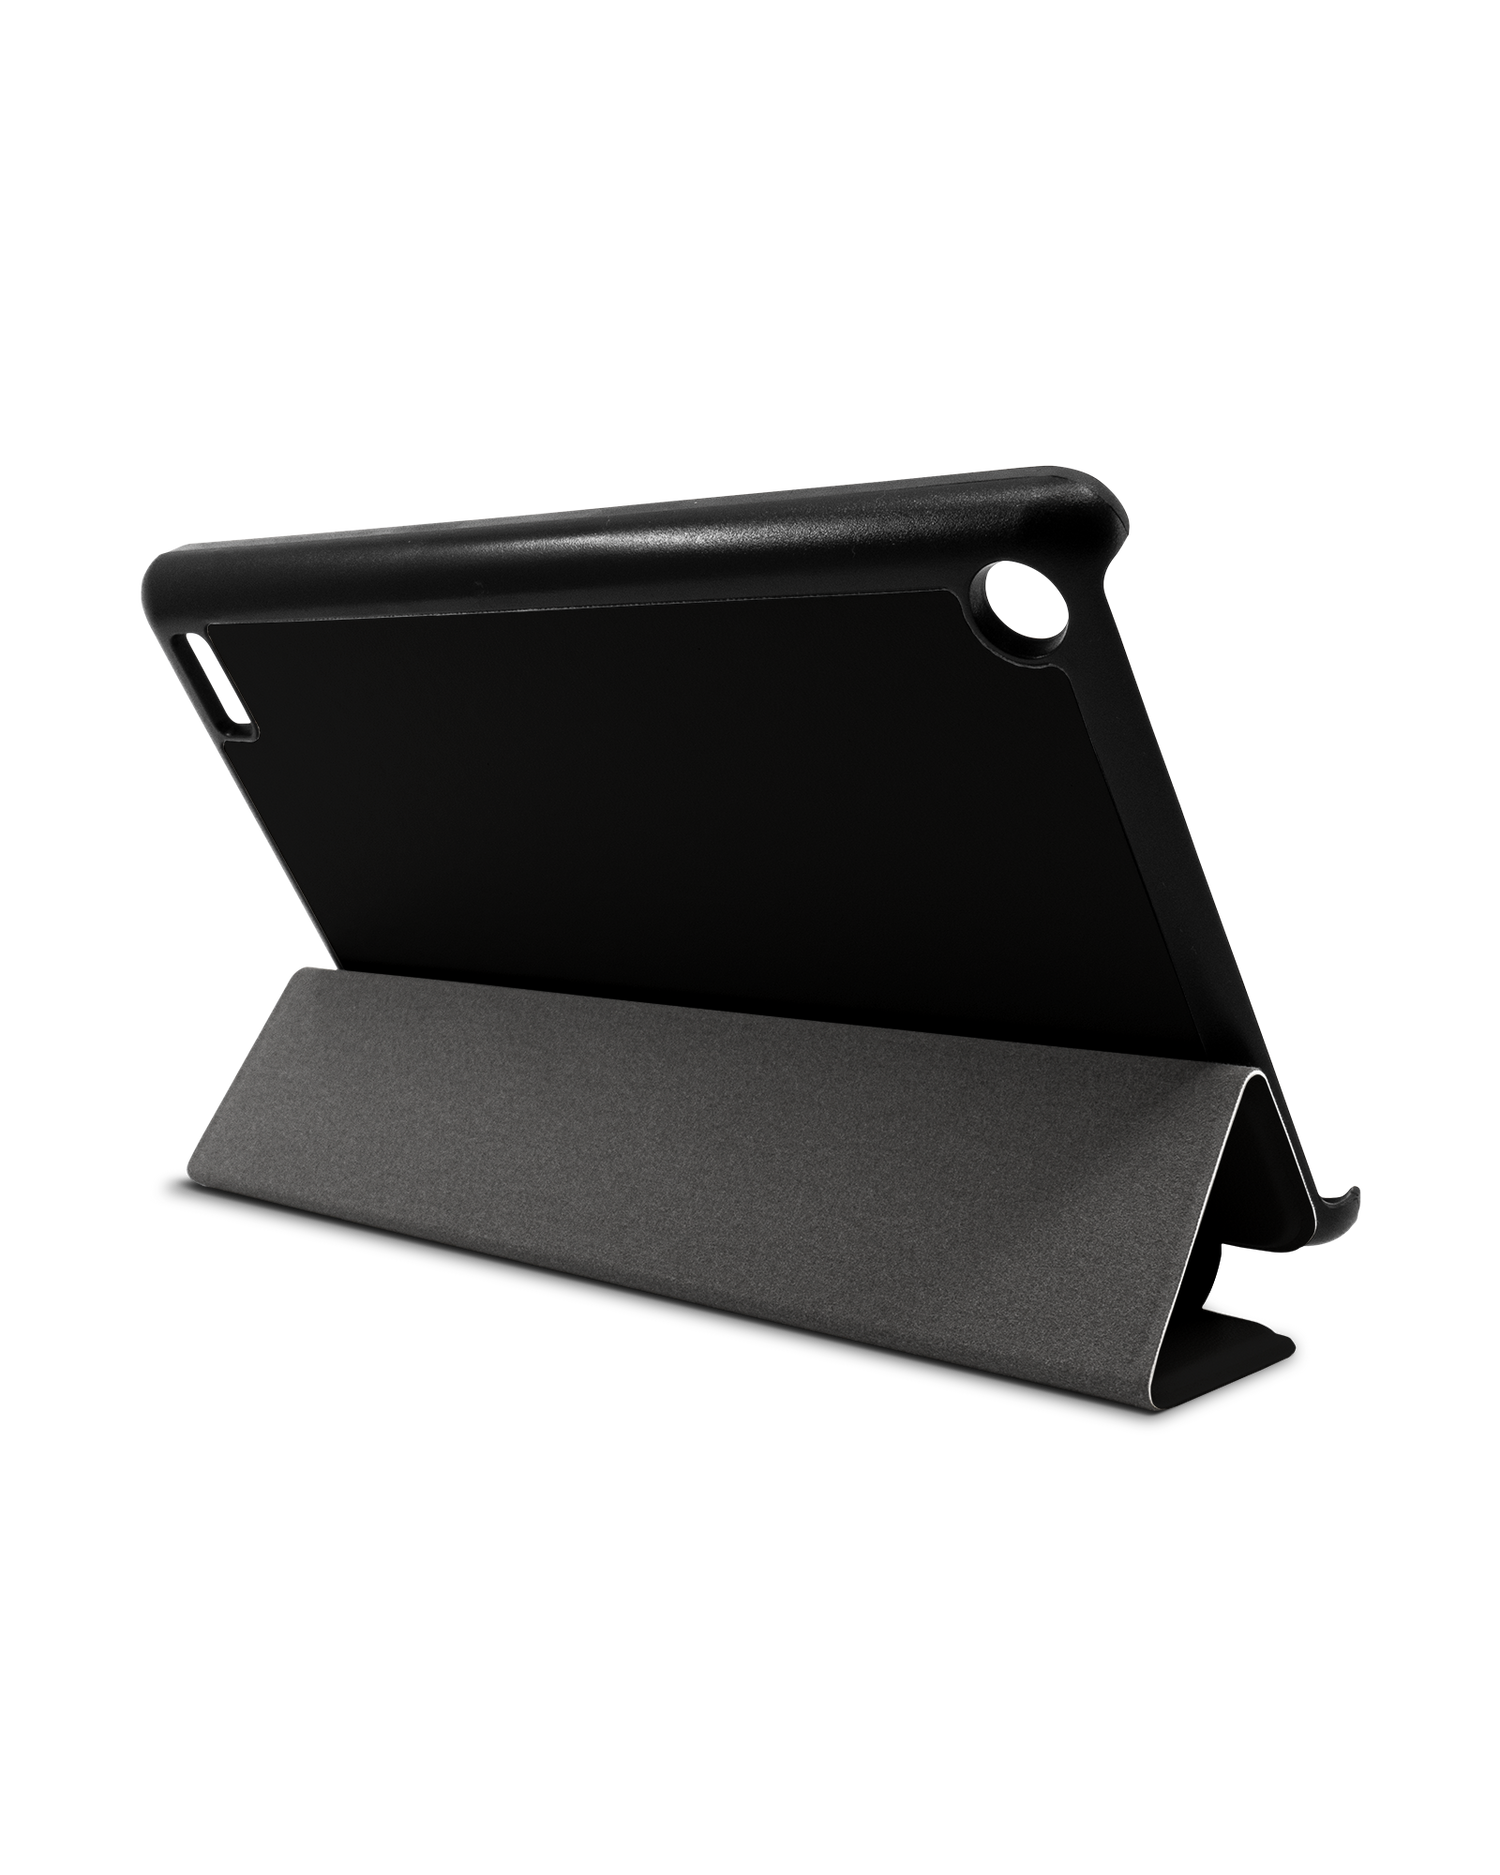 BLACK Tablet Smart Case for Amazon Fire 7: Used as Stand